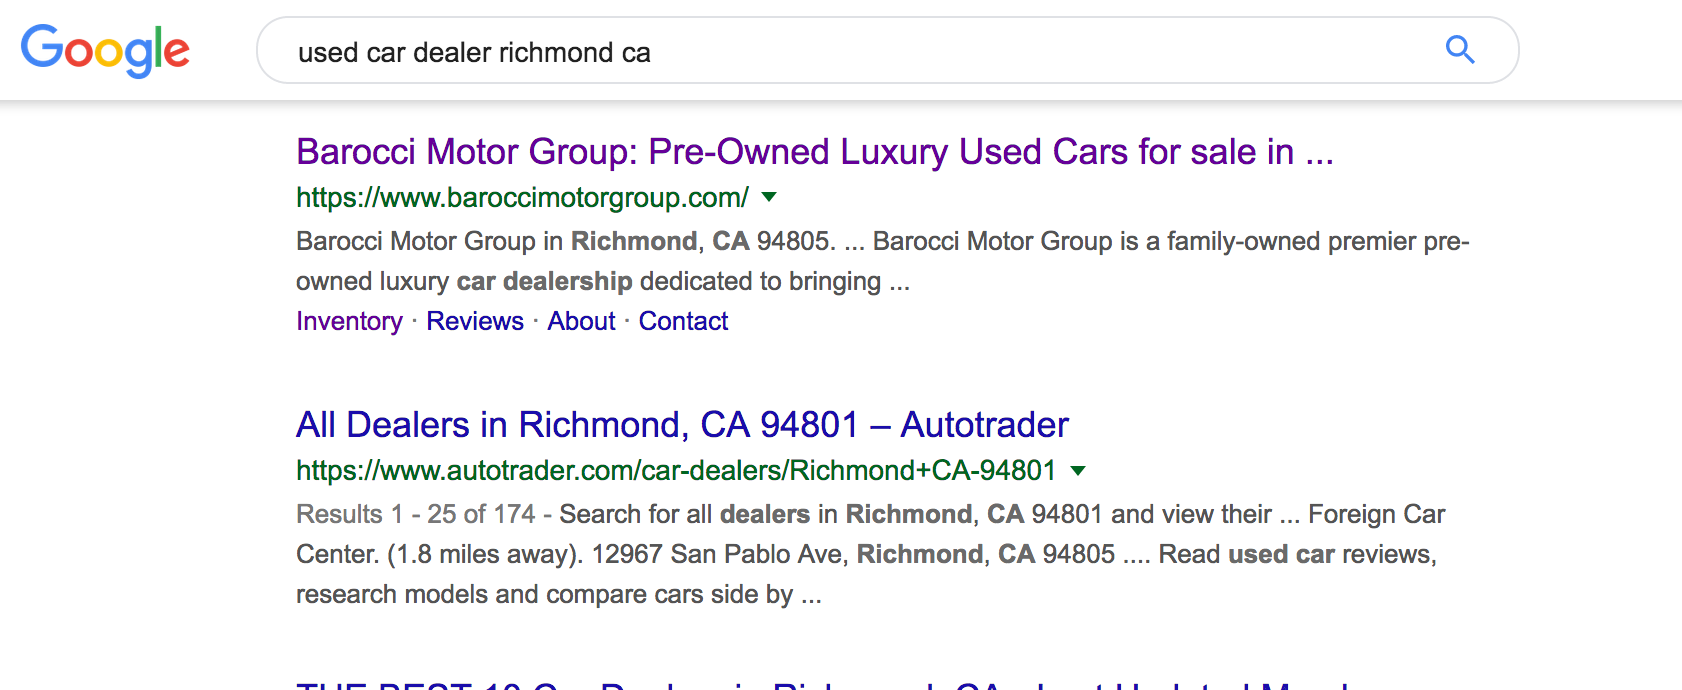 Barocci Motor Group in Richmond appears at the top of Google search in the first position